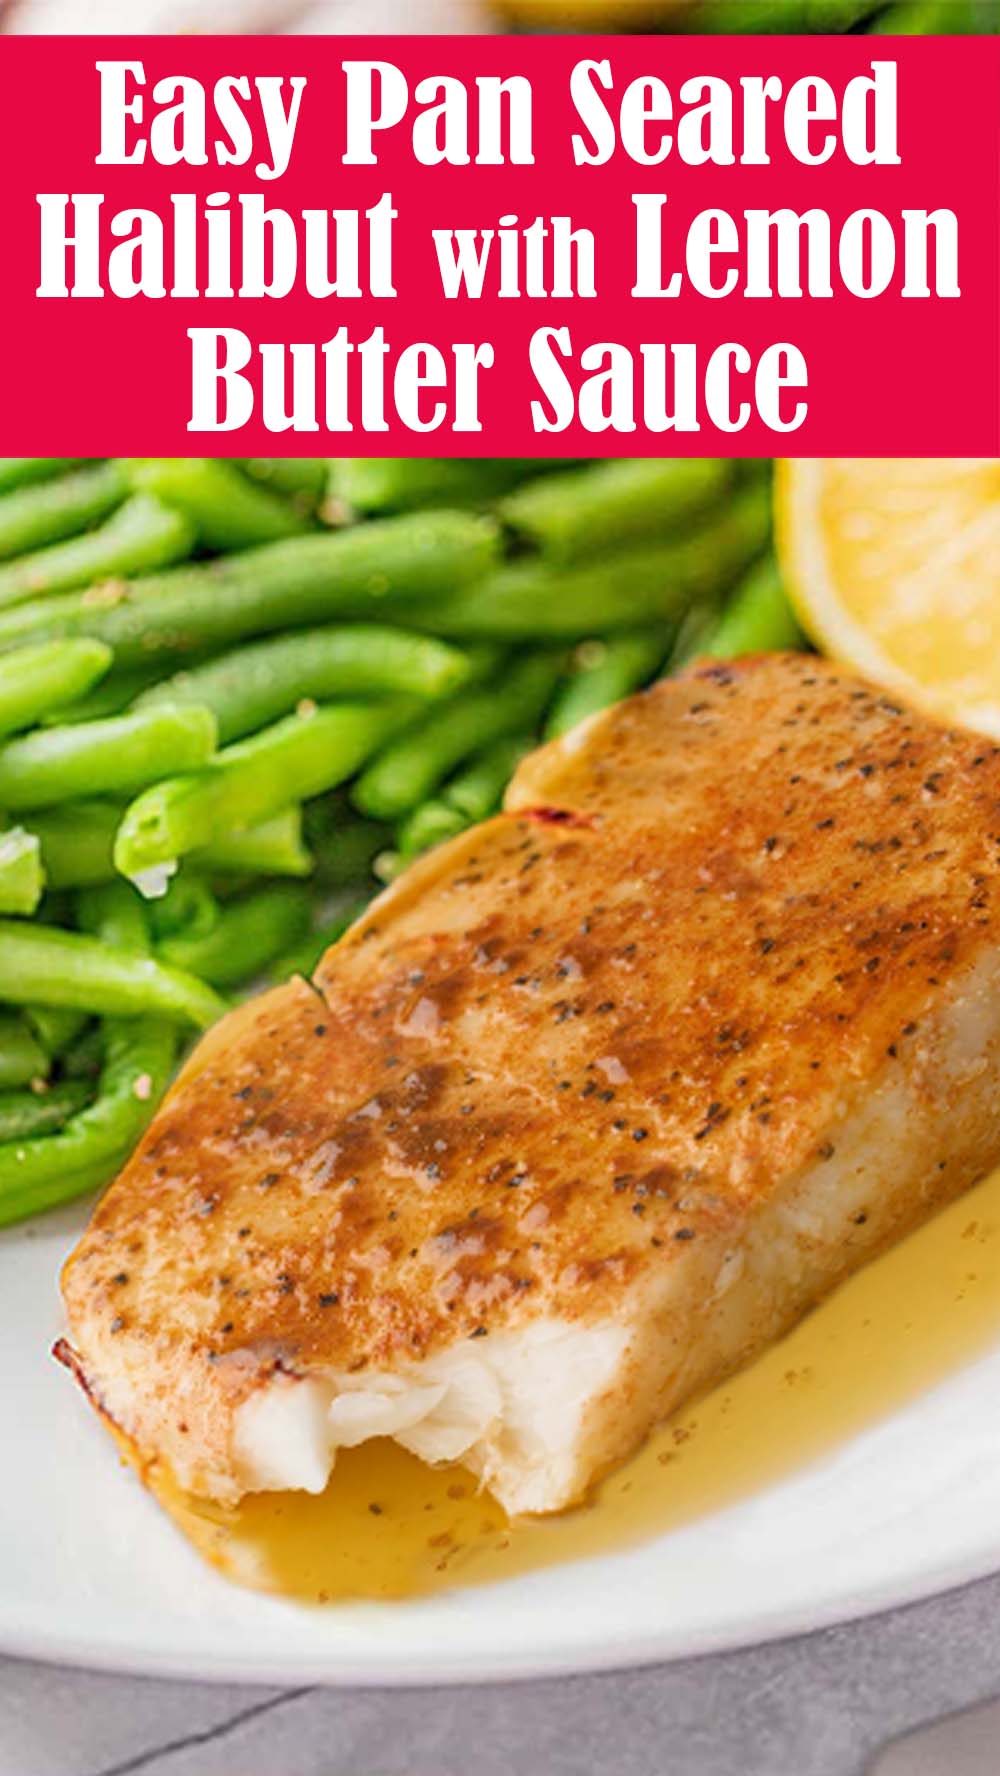 Easy Pan Seared Halibut with Lemon Butter Sauce 1